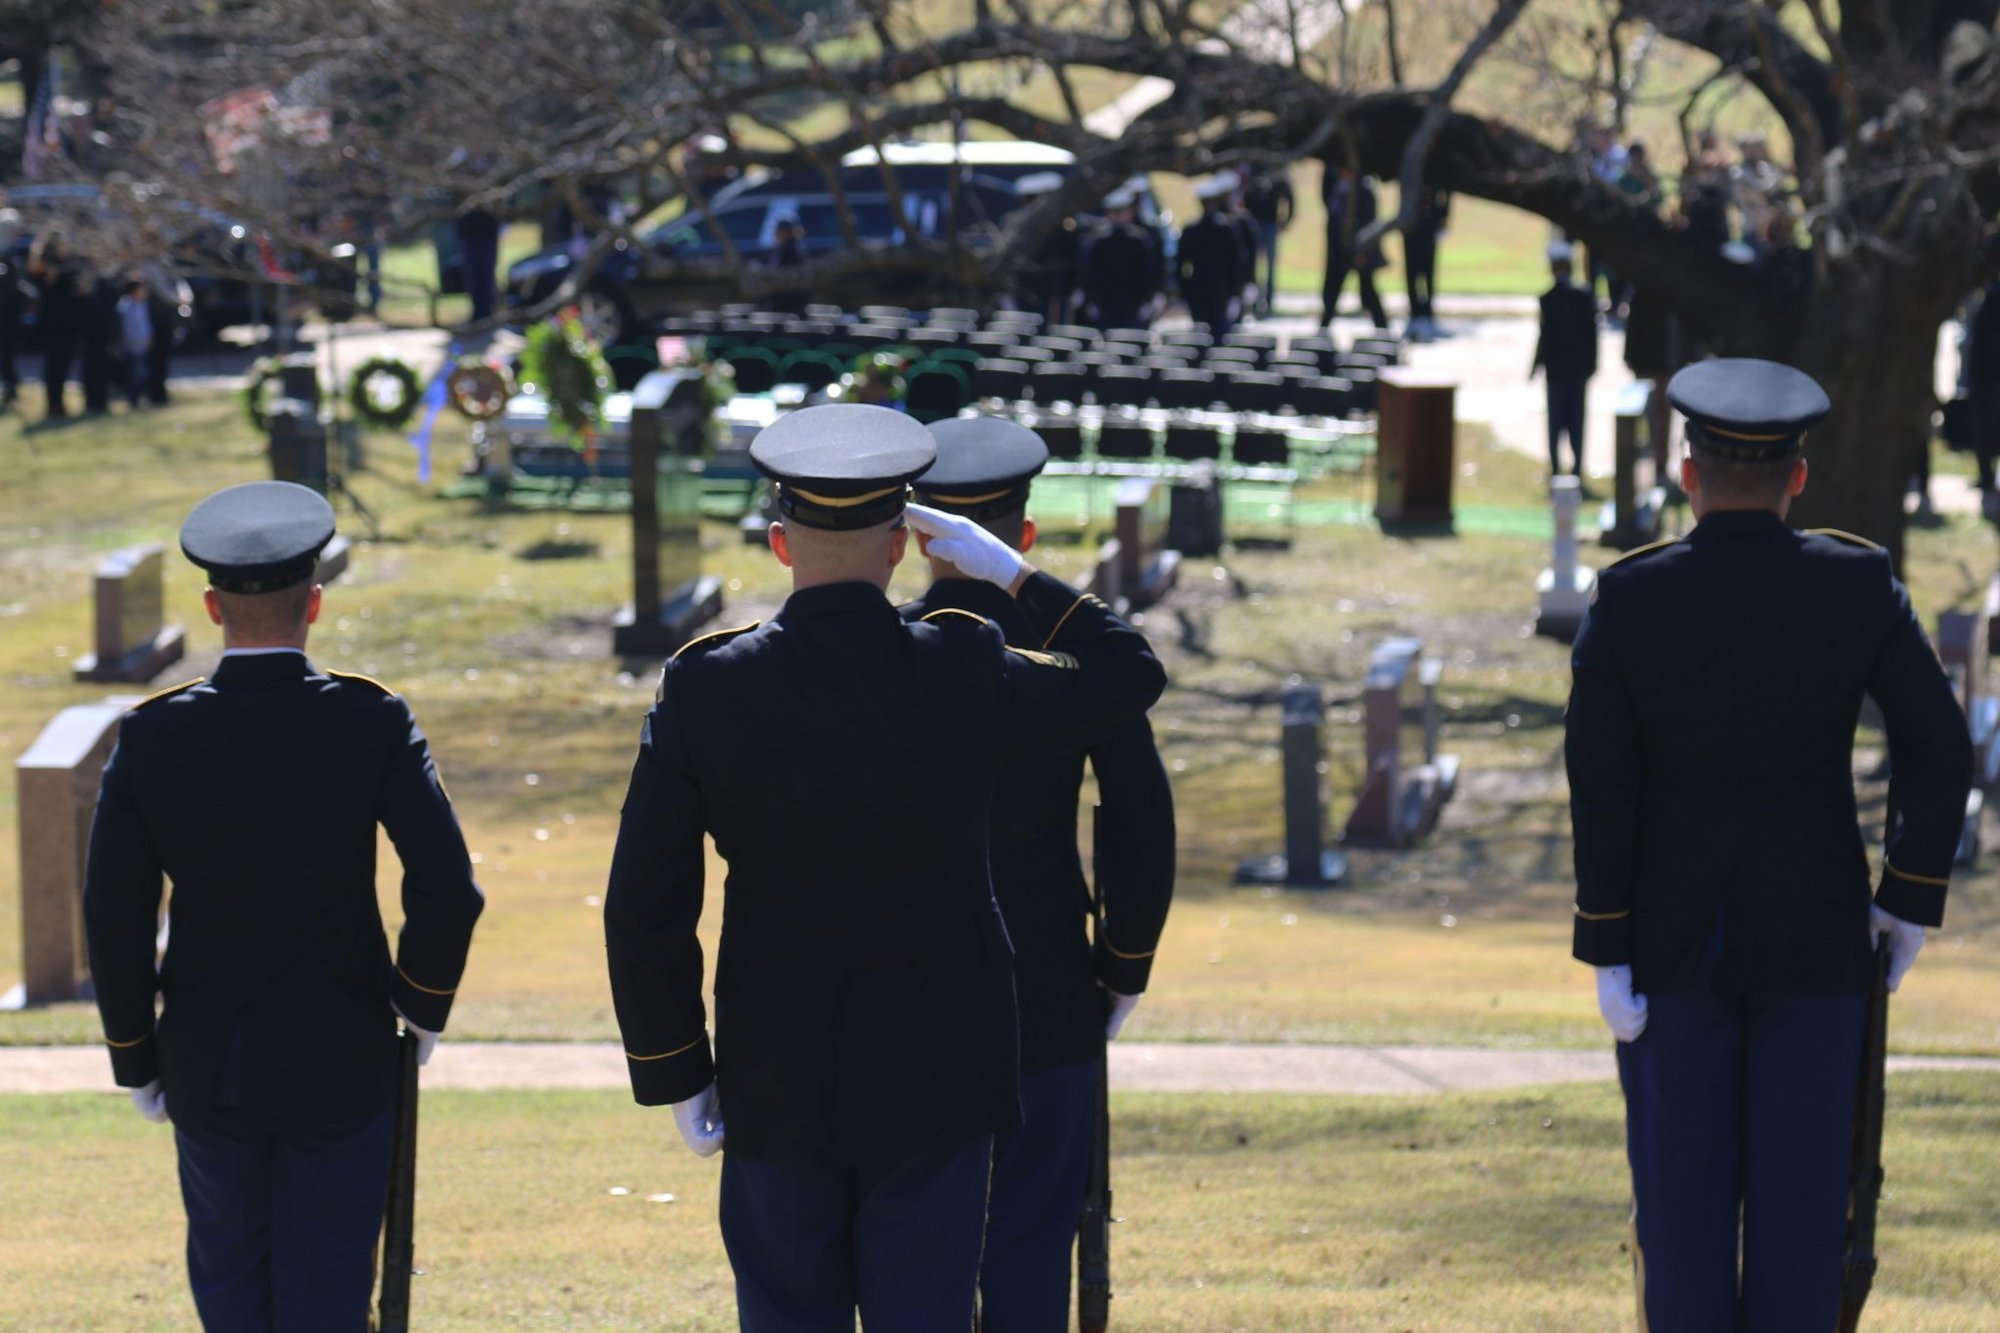 Service Members on the Texas Military Department’s Military Funeral Honors team provide rendering of honors to Richard A. Overton, America’s Oldest World War II veteran, at the Texas National Cemetery in Austin, Texas on Jan. 12, 2019. The burial ceremony brought together loved ones, service members, and the public. U.S. Army National Guard photo by Spc. Gerardo Escobar